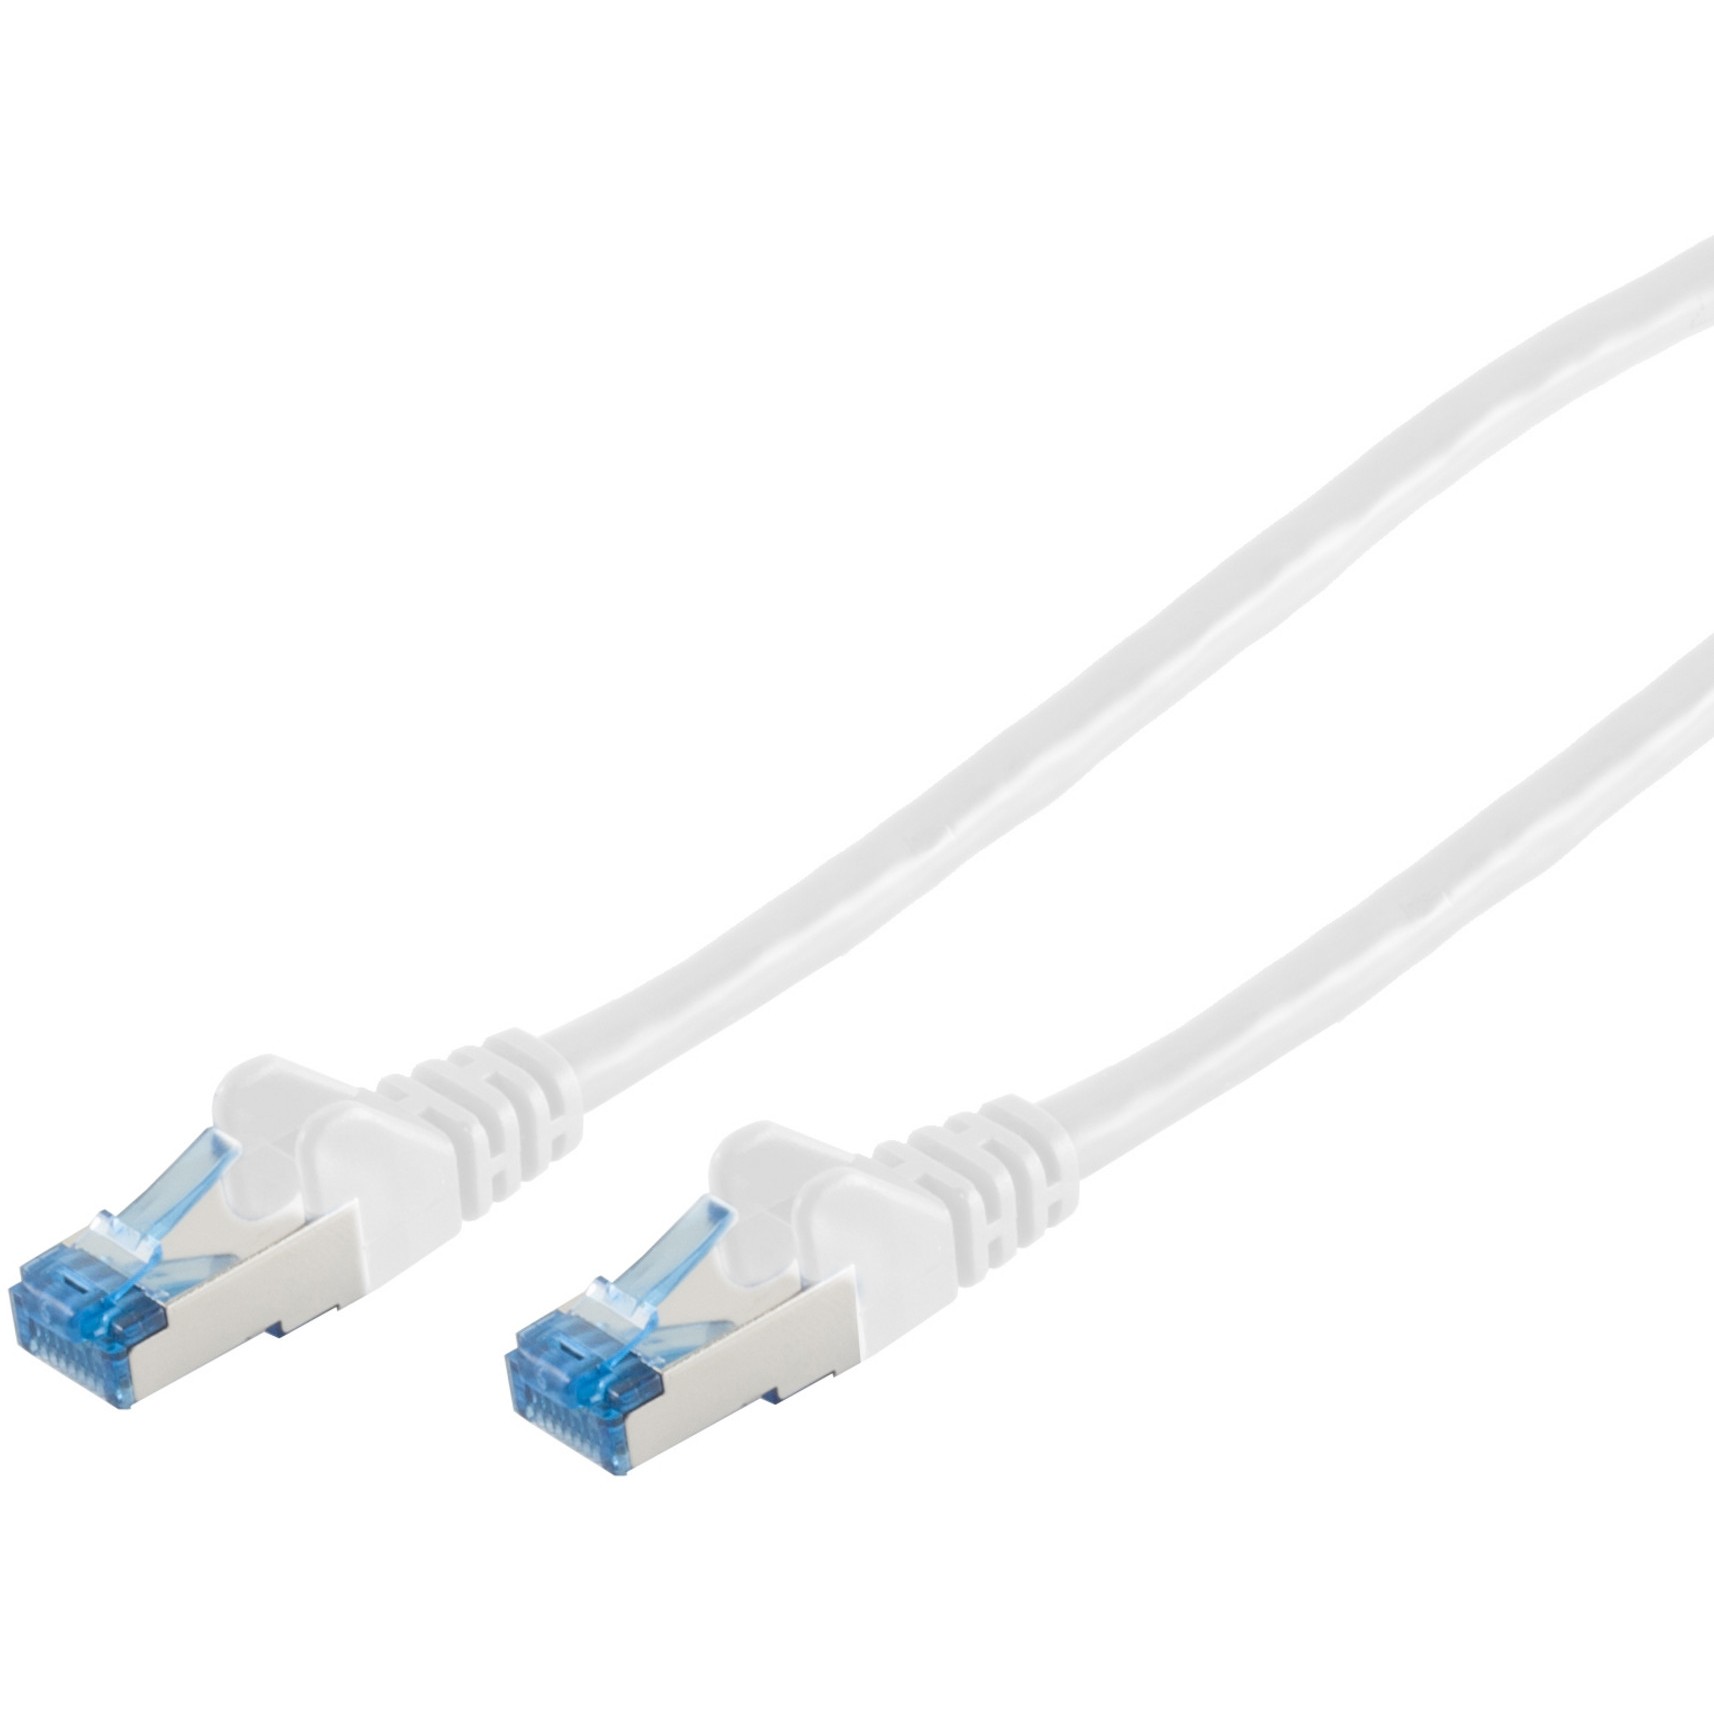 S-Conn 75720-W networking cable